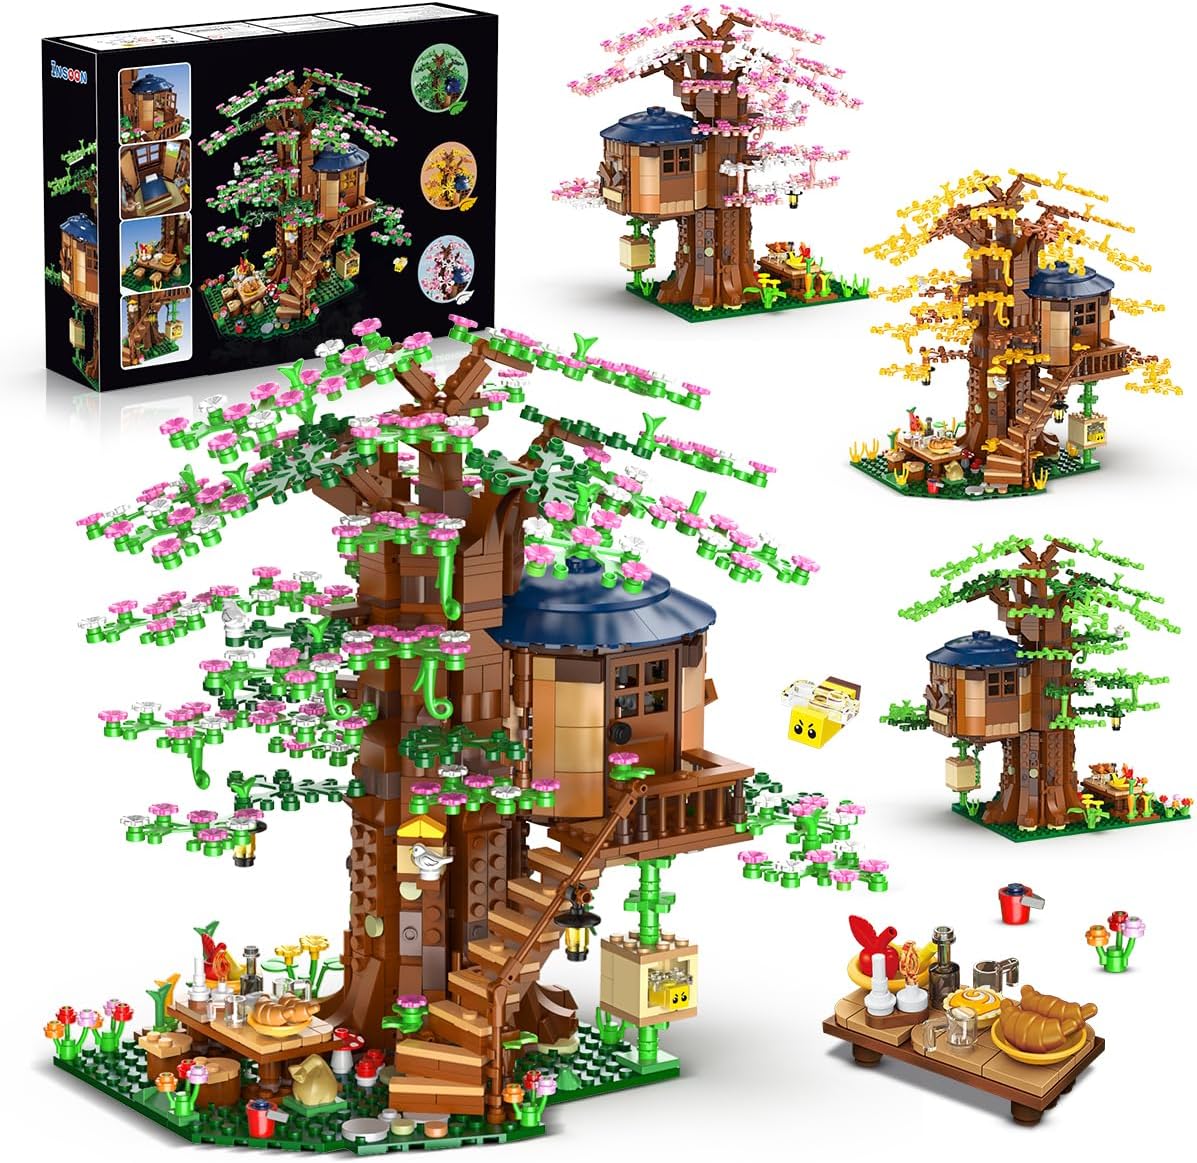 4 in 1 Tree House Building Set with LED Light, 1157 PCS Flowers Treehouse Building Block Toy, Forest Wood House Building Kit with Bird Bees, Birthday Gift for Adults Teens Kids Girls Boys 10+